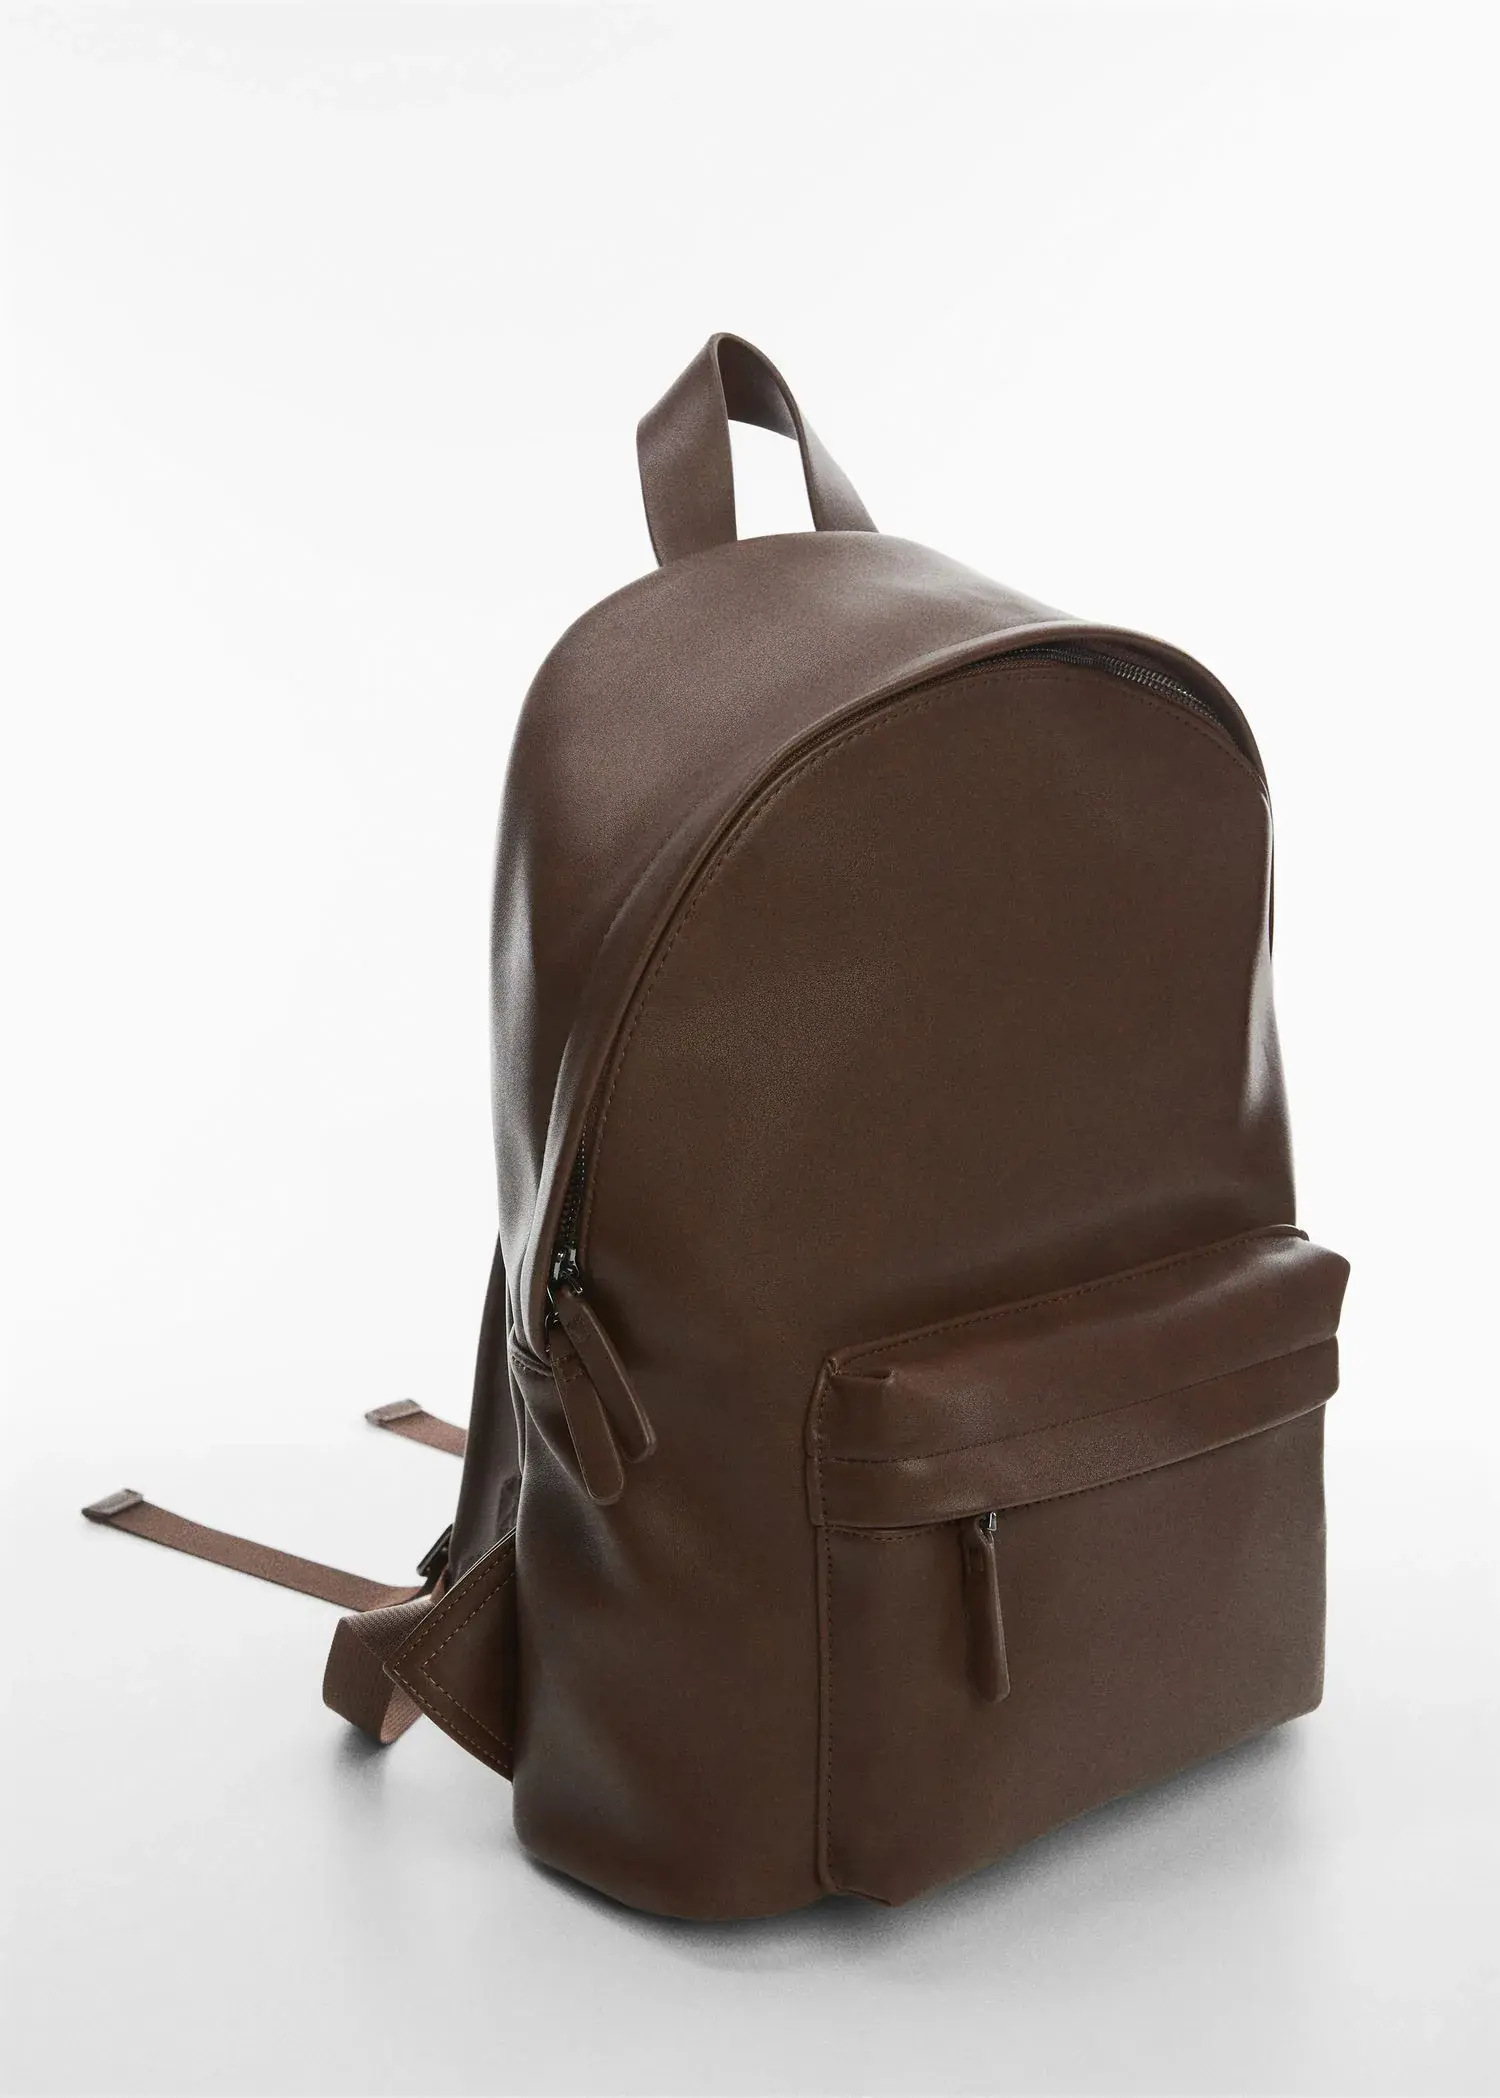 Mango Recycled leather backpack. 2